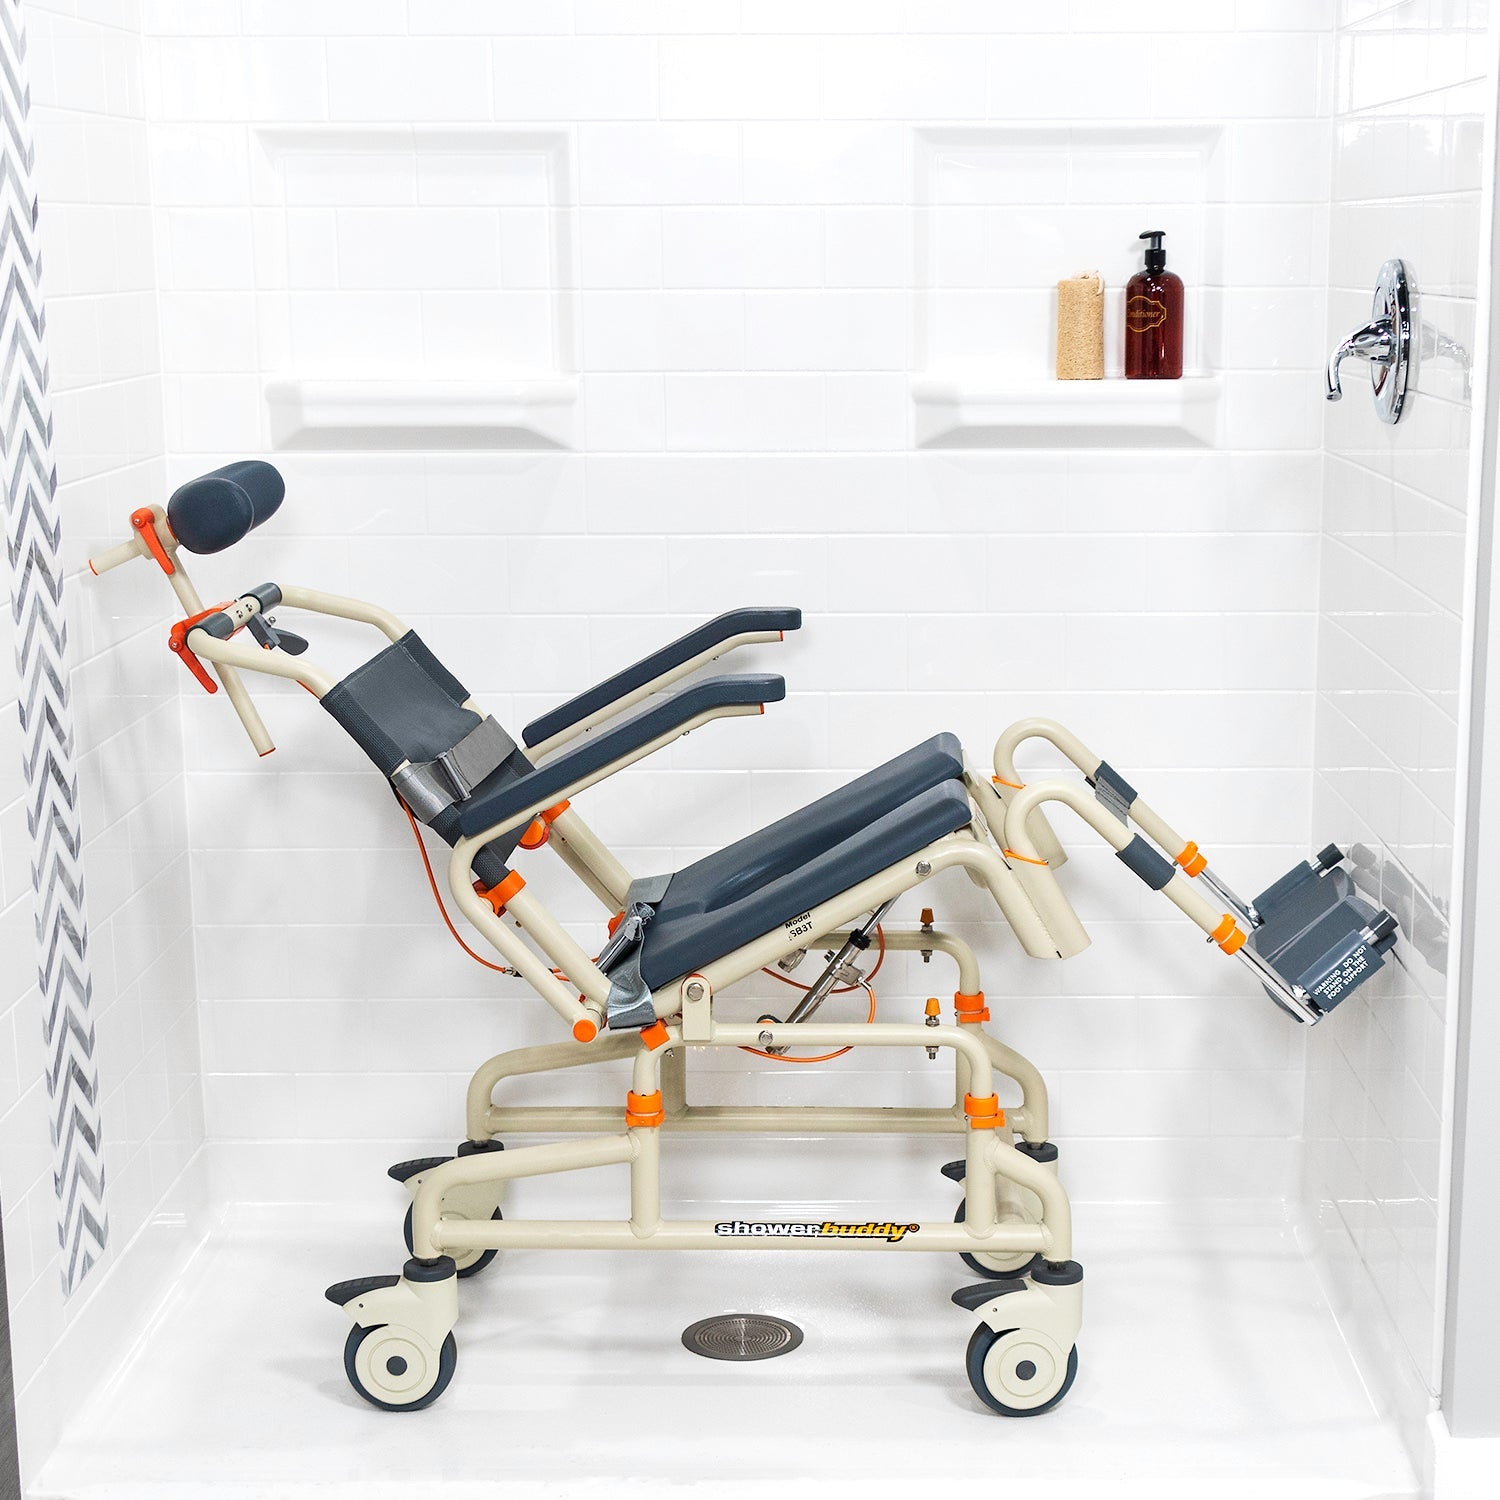 ShowerBuddy SB3T Roll-In Shower Chair with Tilt-SolutionBased